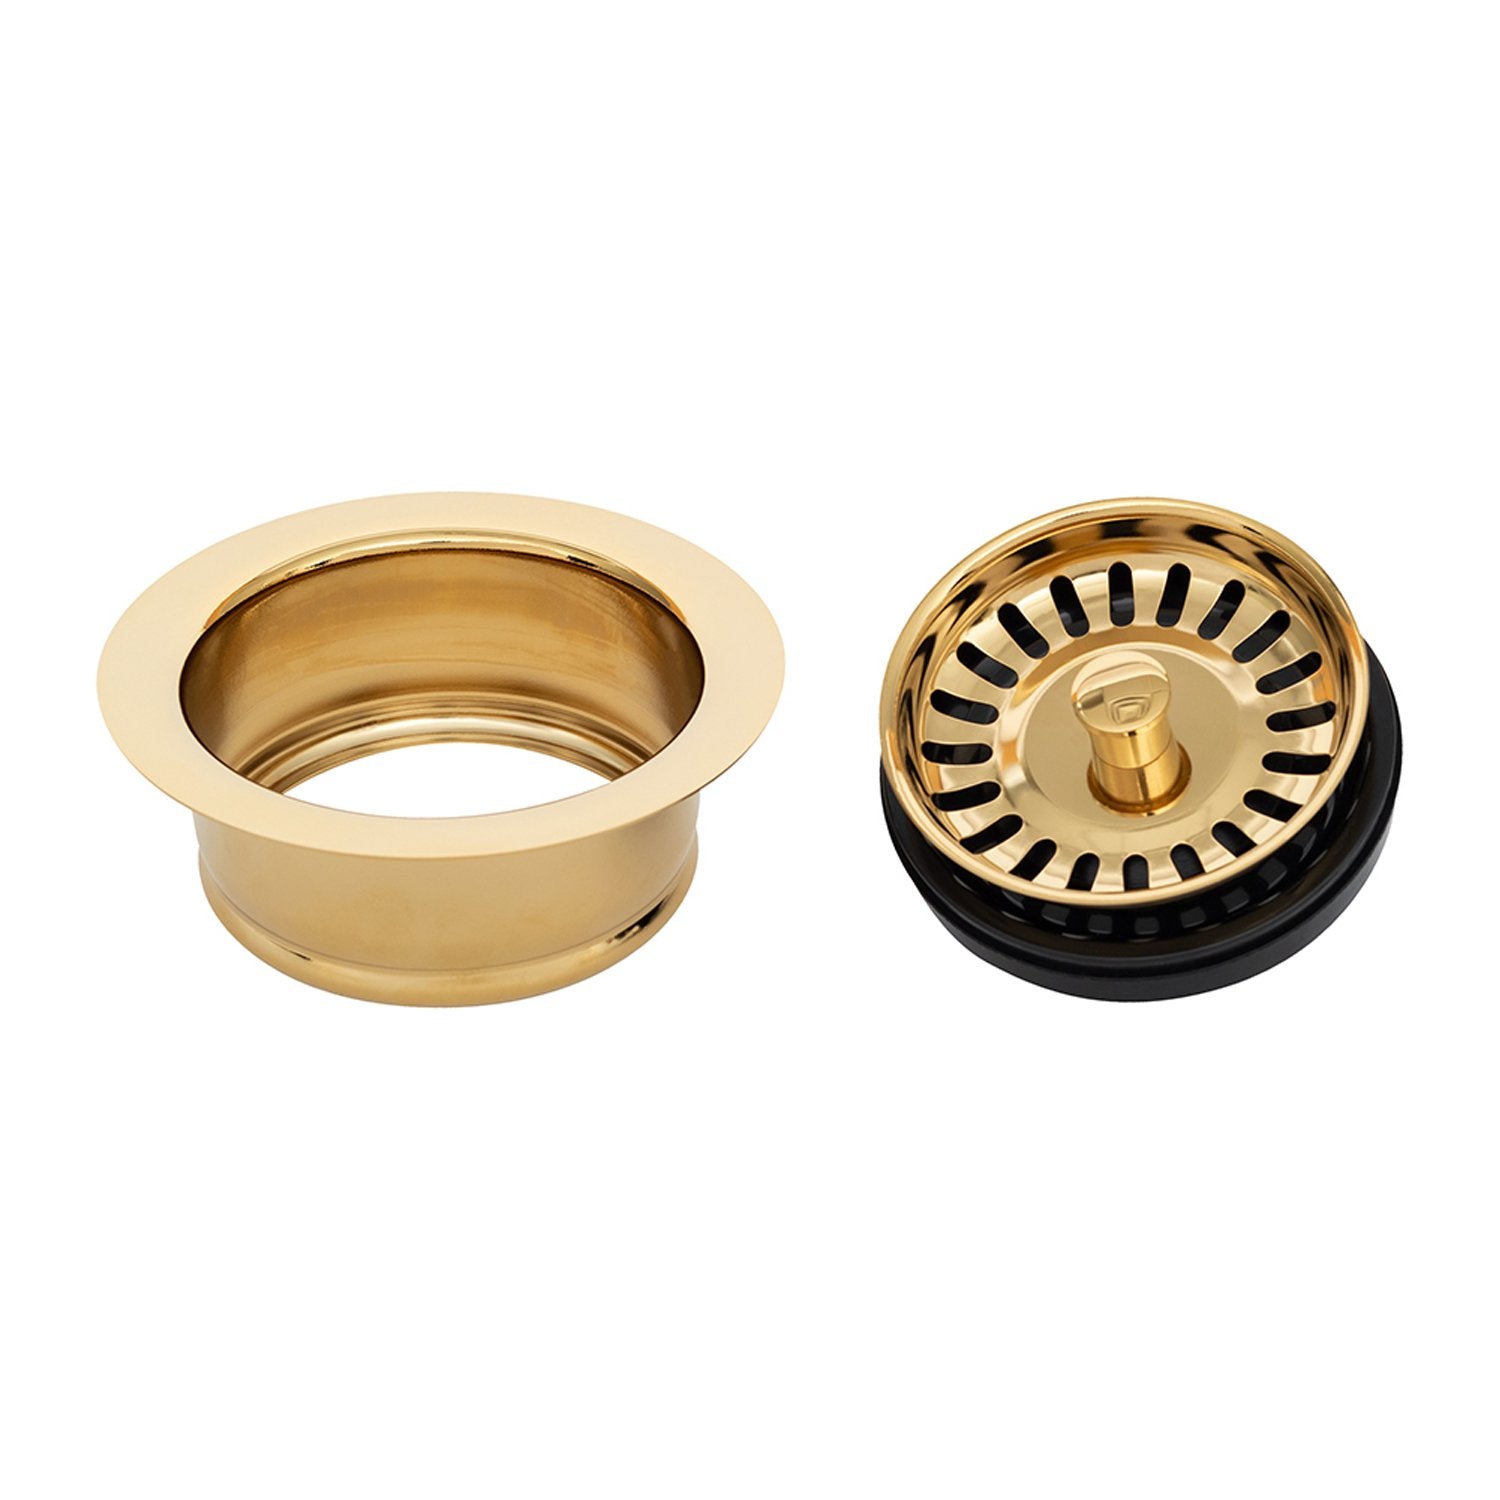 3.5" Deluxe Garbage Disposal Drain with Basket - Polished Brass